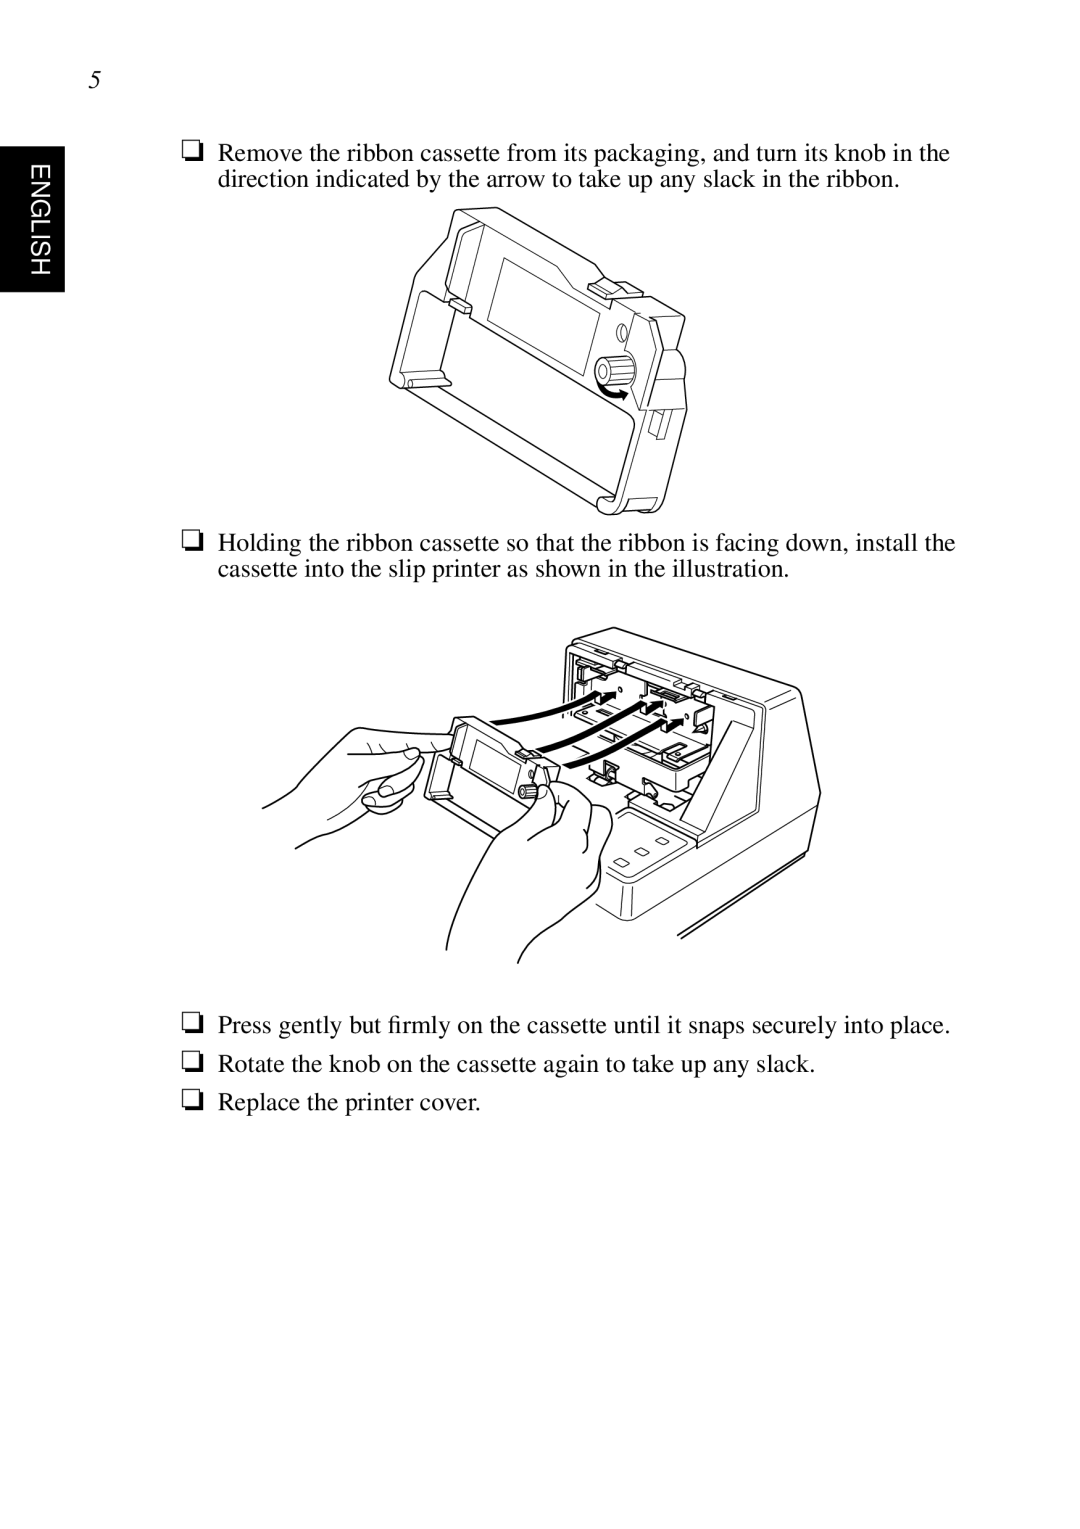 Star Micronics SP298 user manual English, Rotate the knob on the cassette again to take up any slack 